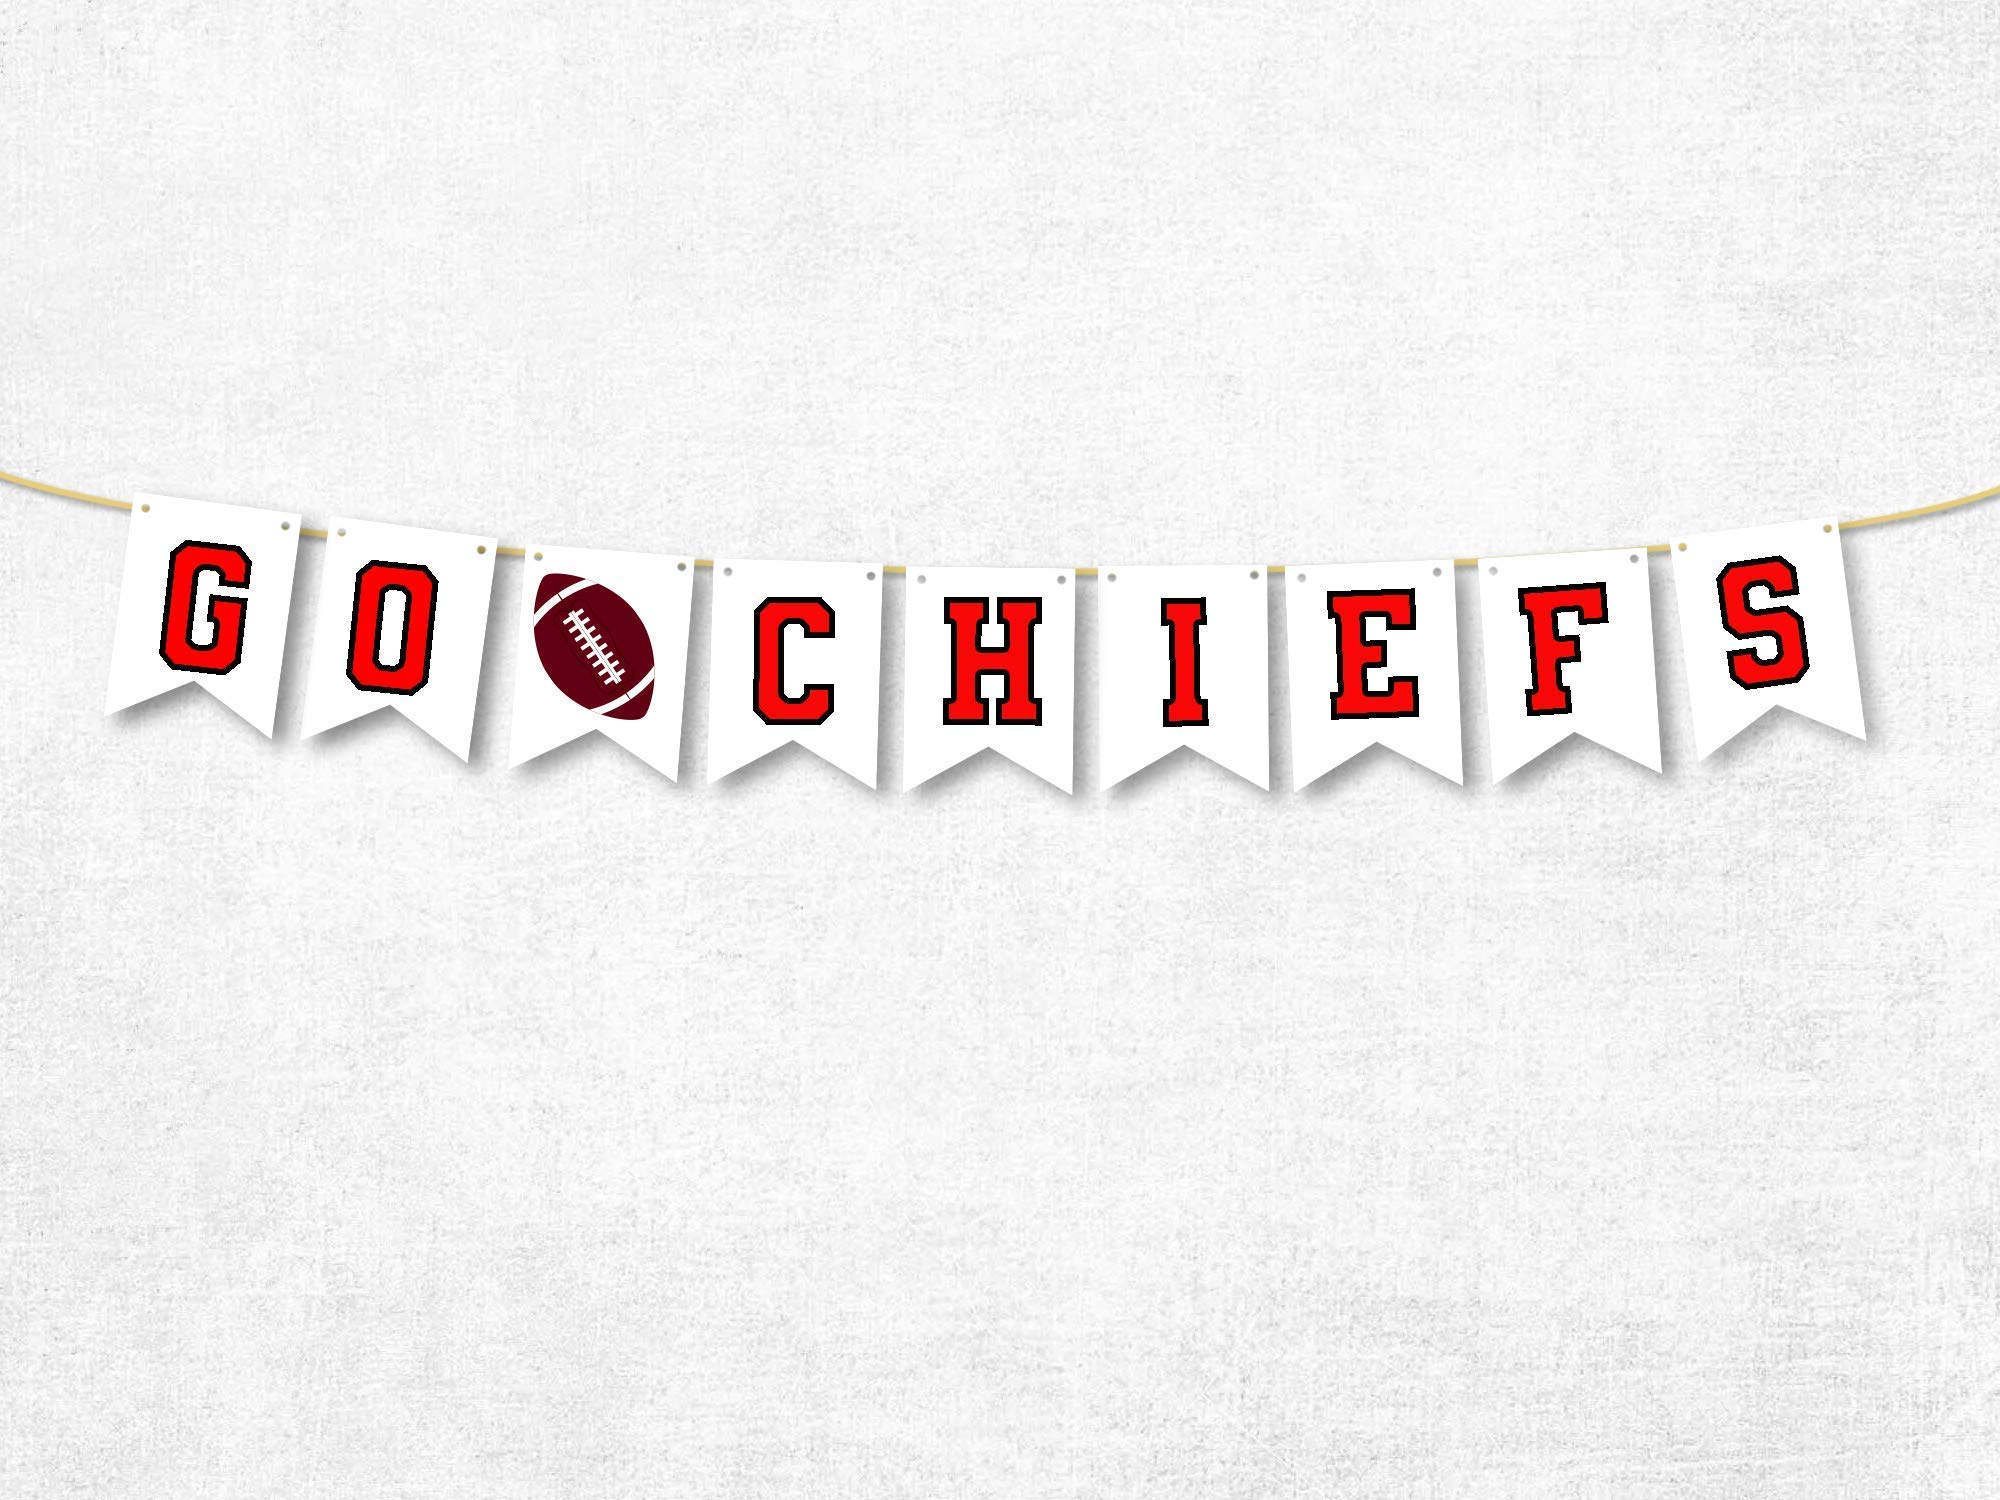 Swanky Party Box | Go Chiefs Football Banner | Cardstock Football Banner